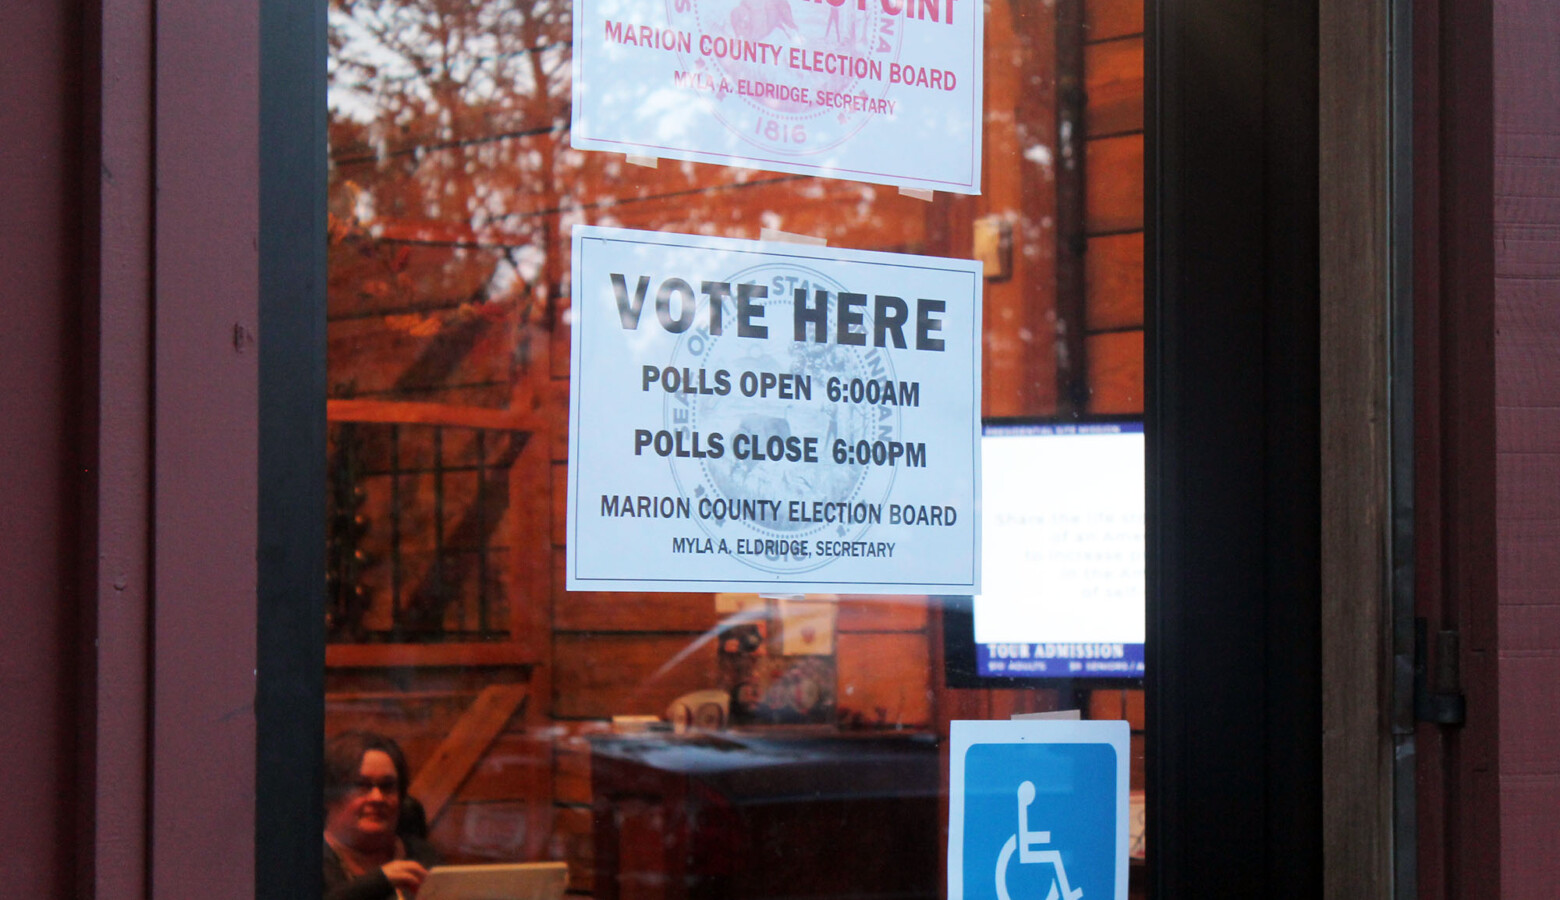 Poll watchers are a very defined role in state election law. (Lauren Chapman/IPB News)